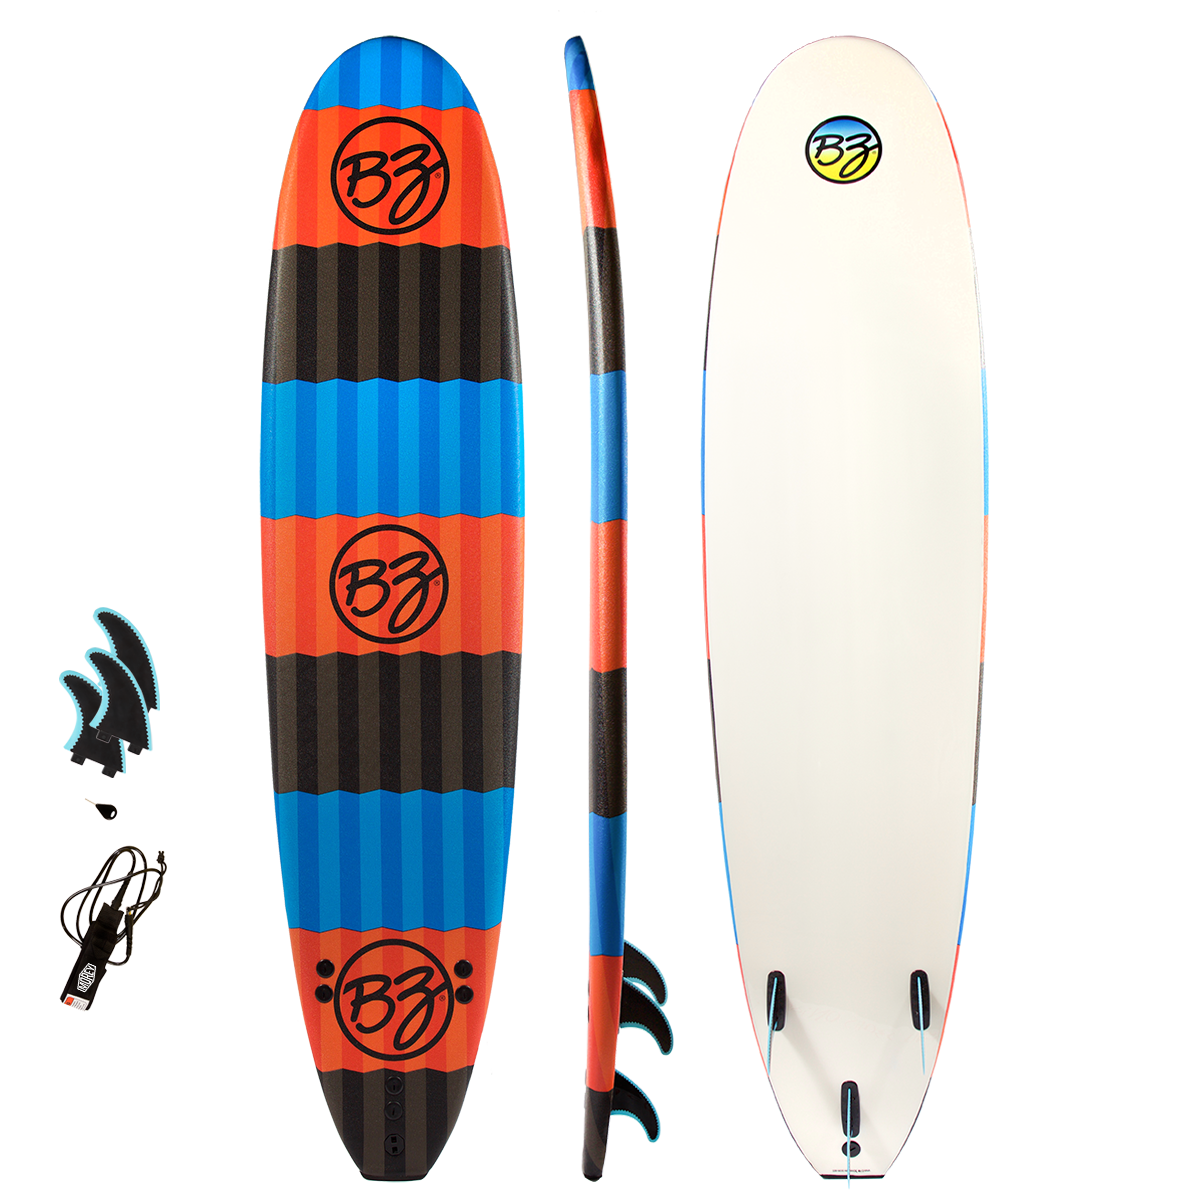 Bz 8 Eps Surfboard Squash Tail Shape Pu Leash And Three Fin Set Up